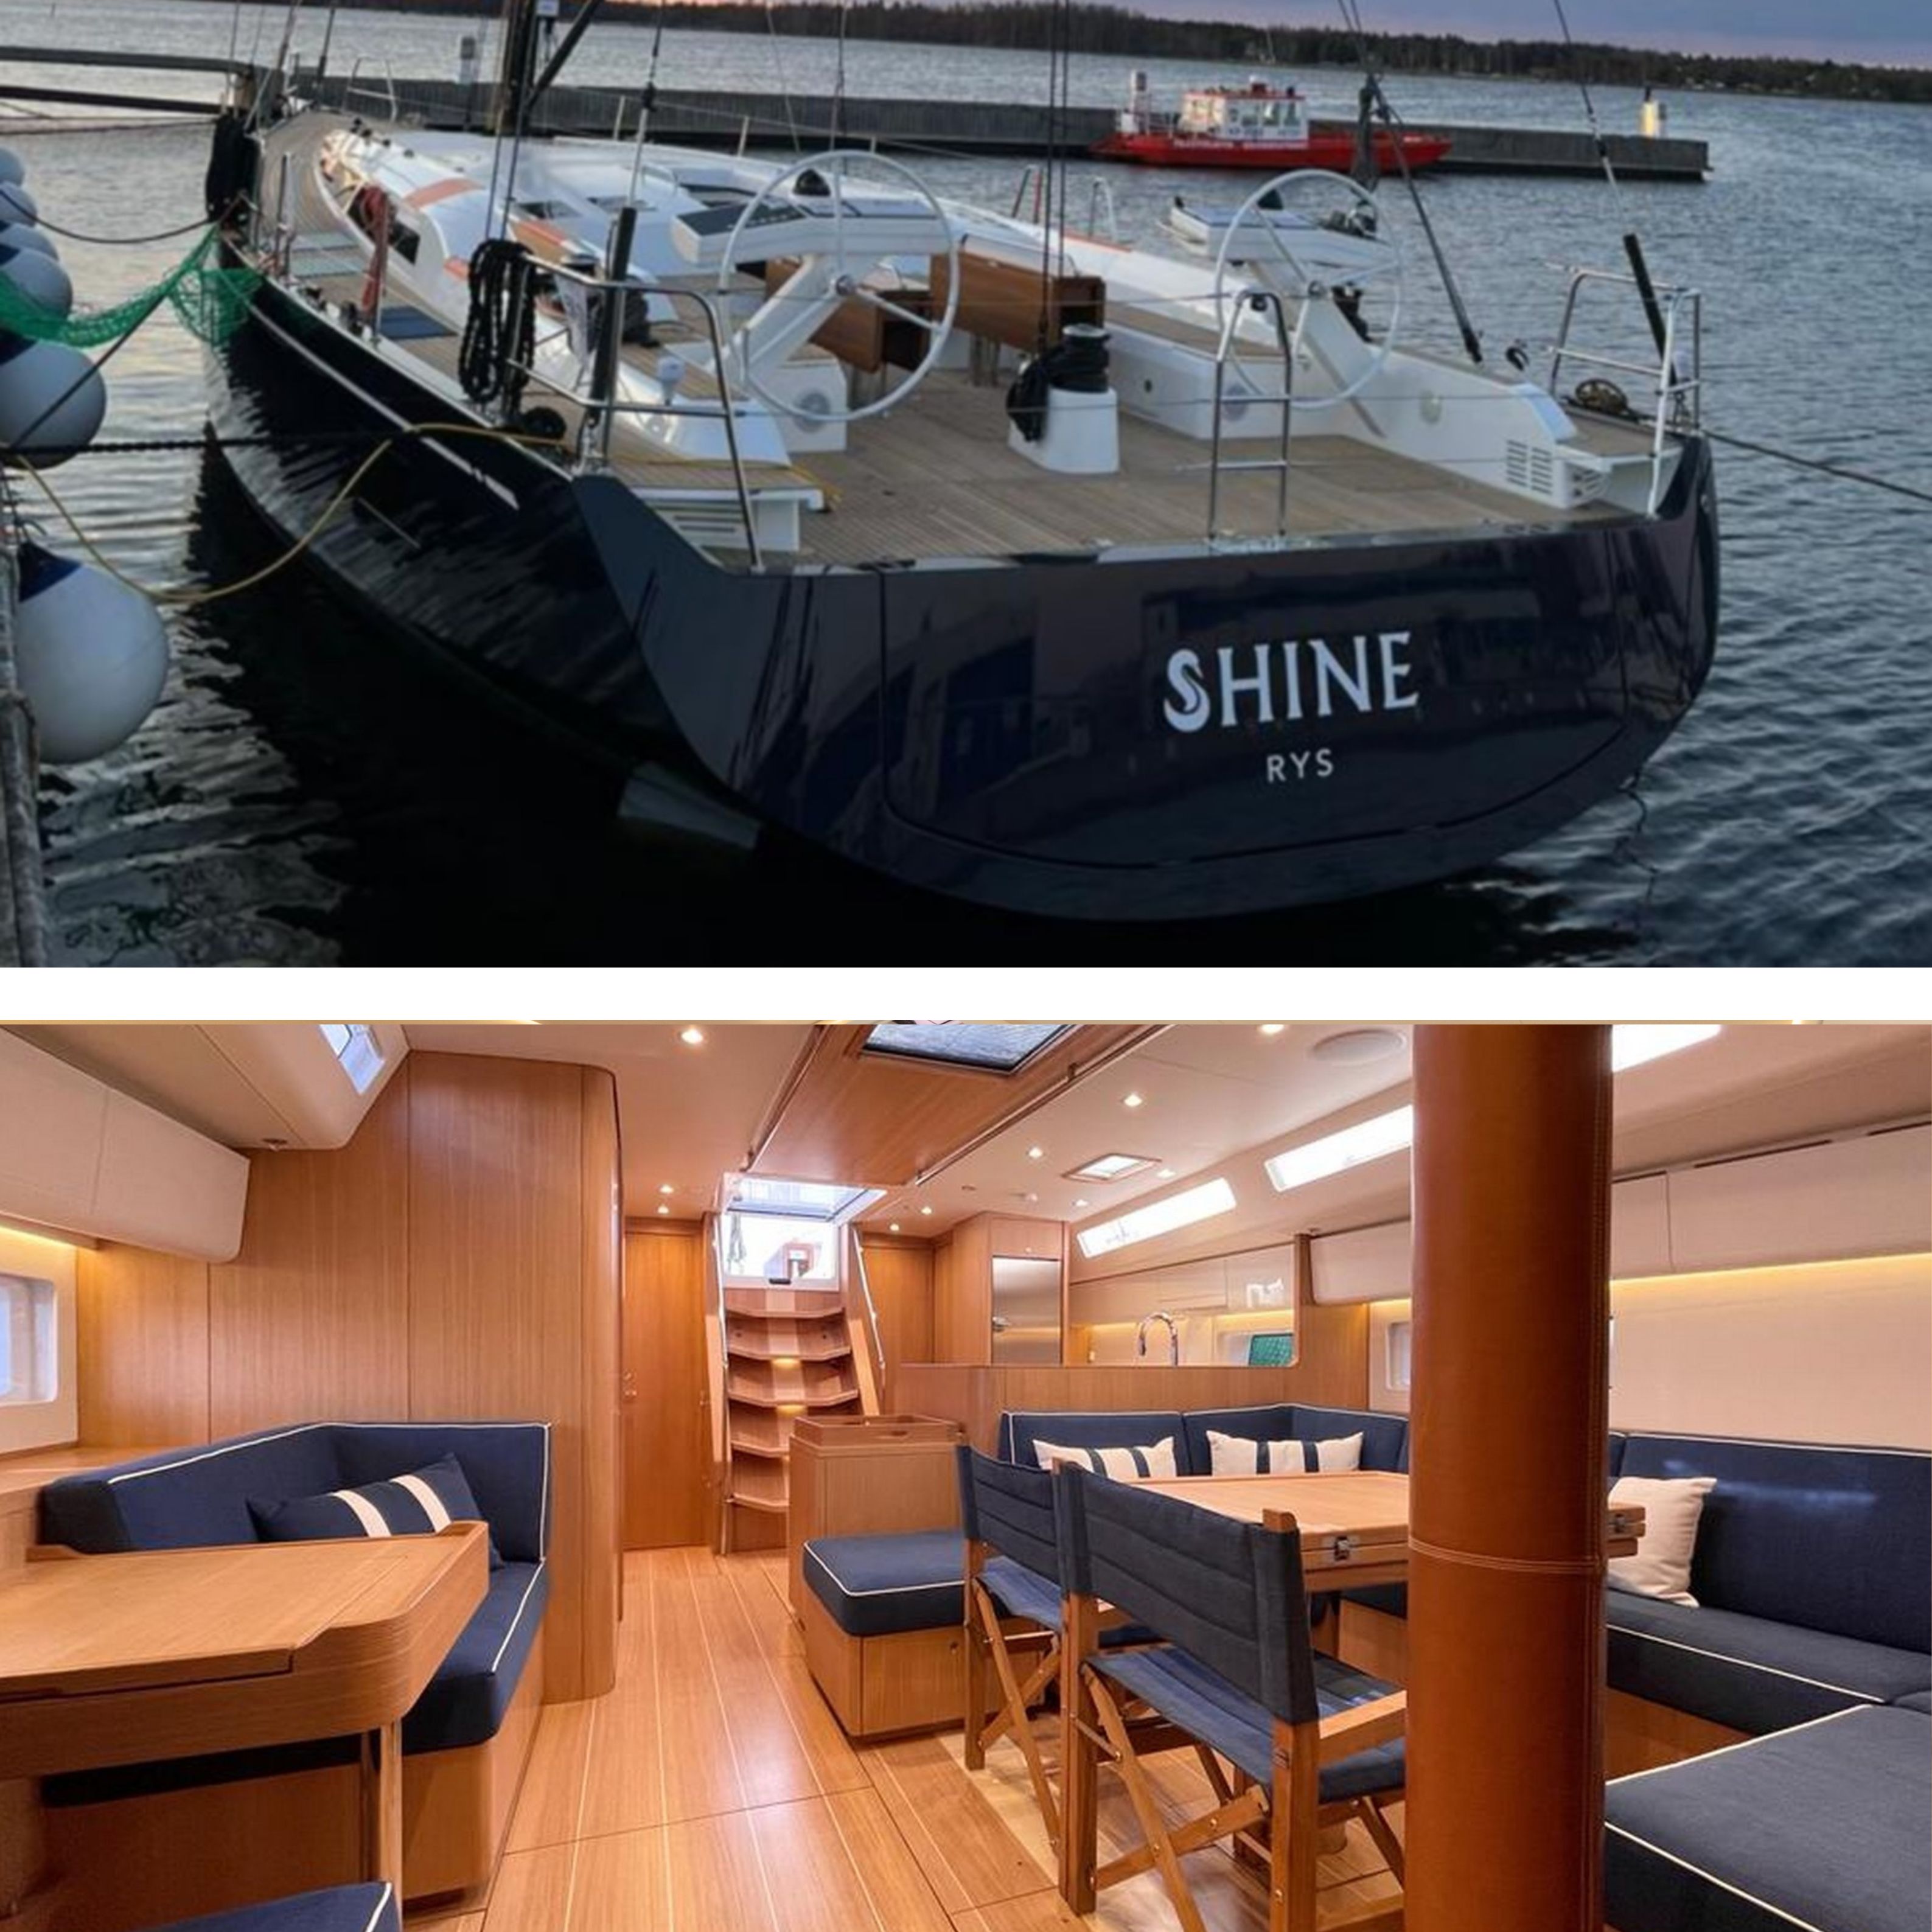 SHINE: New yacht for sale!